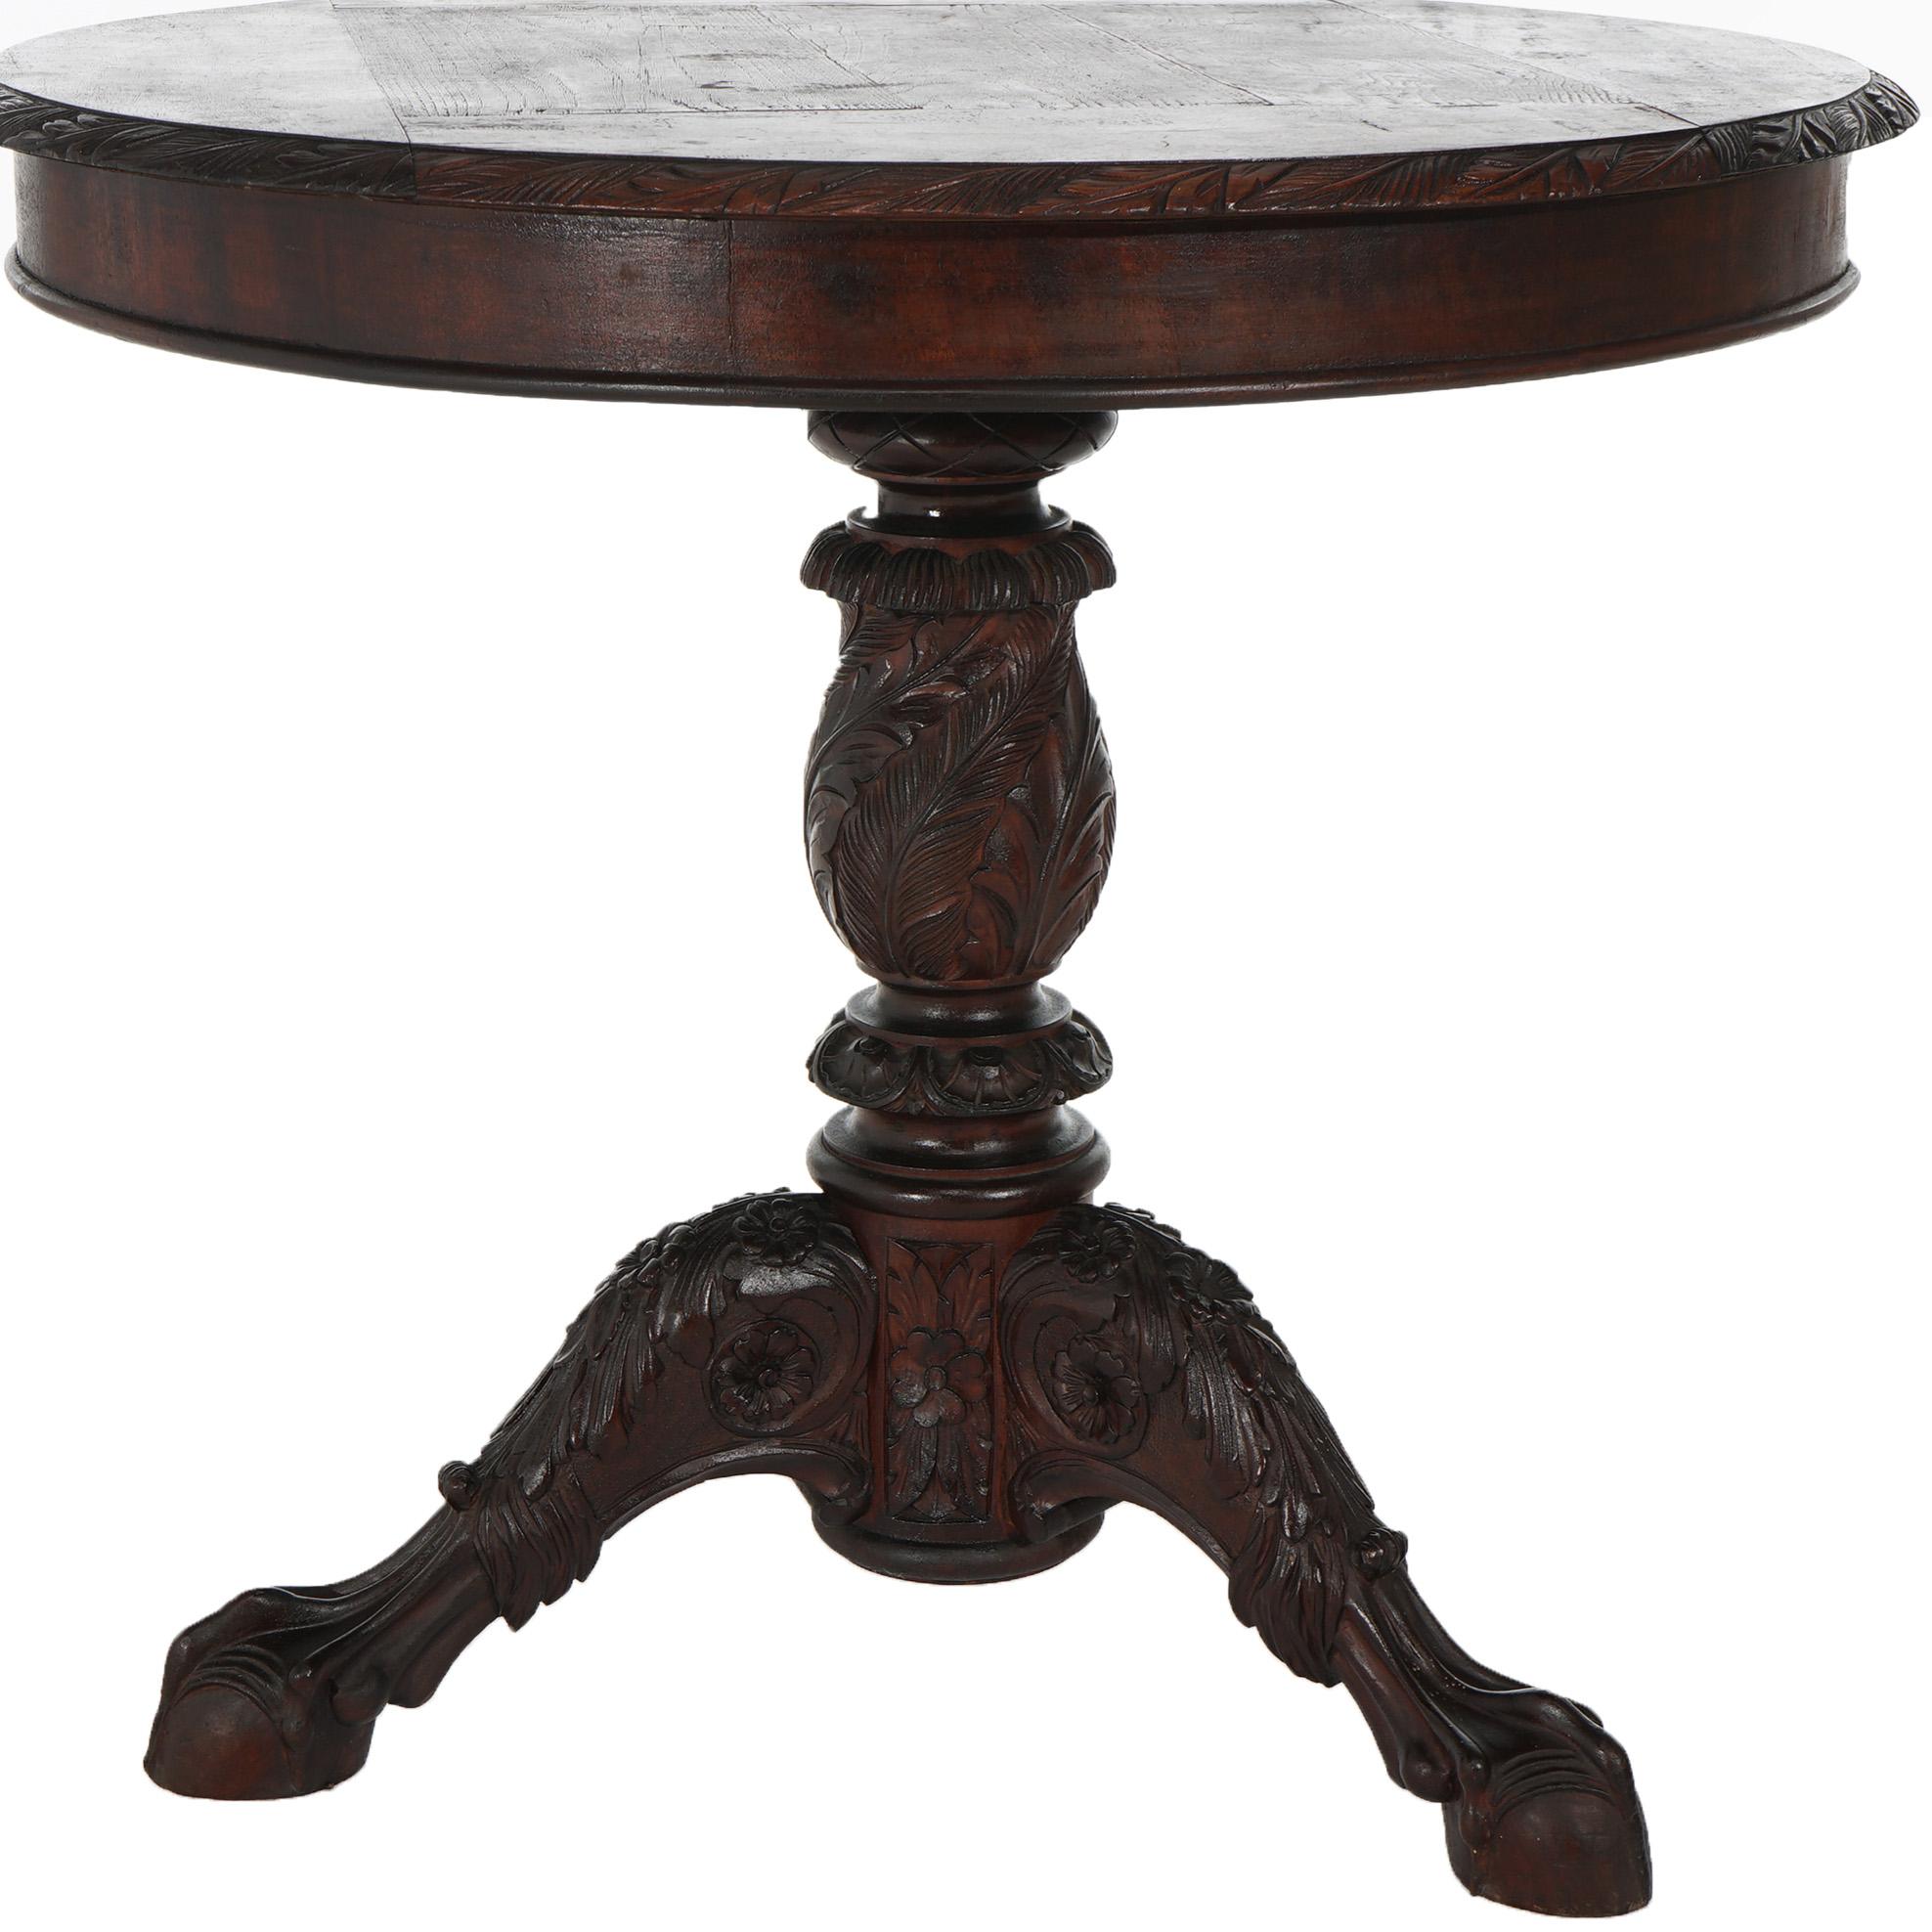 Antique Neoclassical American Empire Carved Mahogany Center Table C1840 In Good Condition For Sale In Big Flats, NY